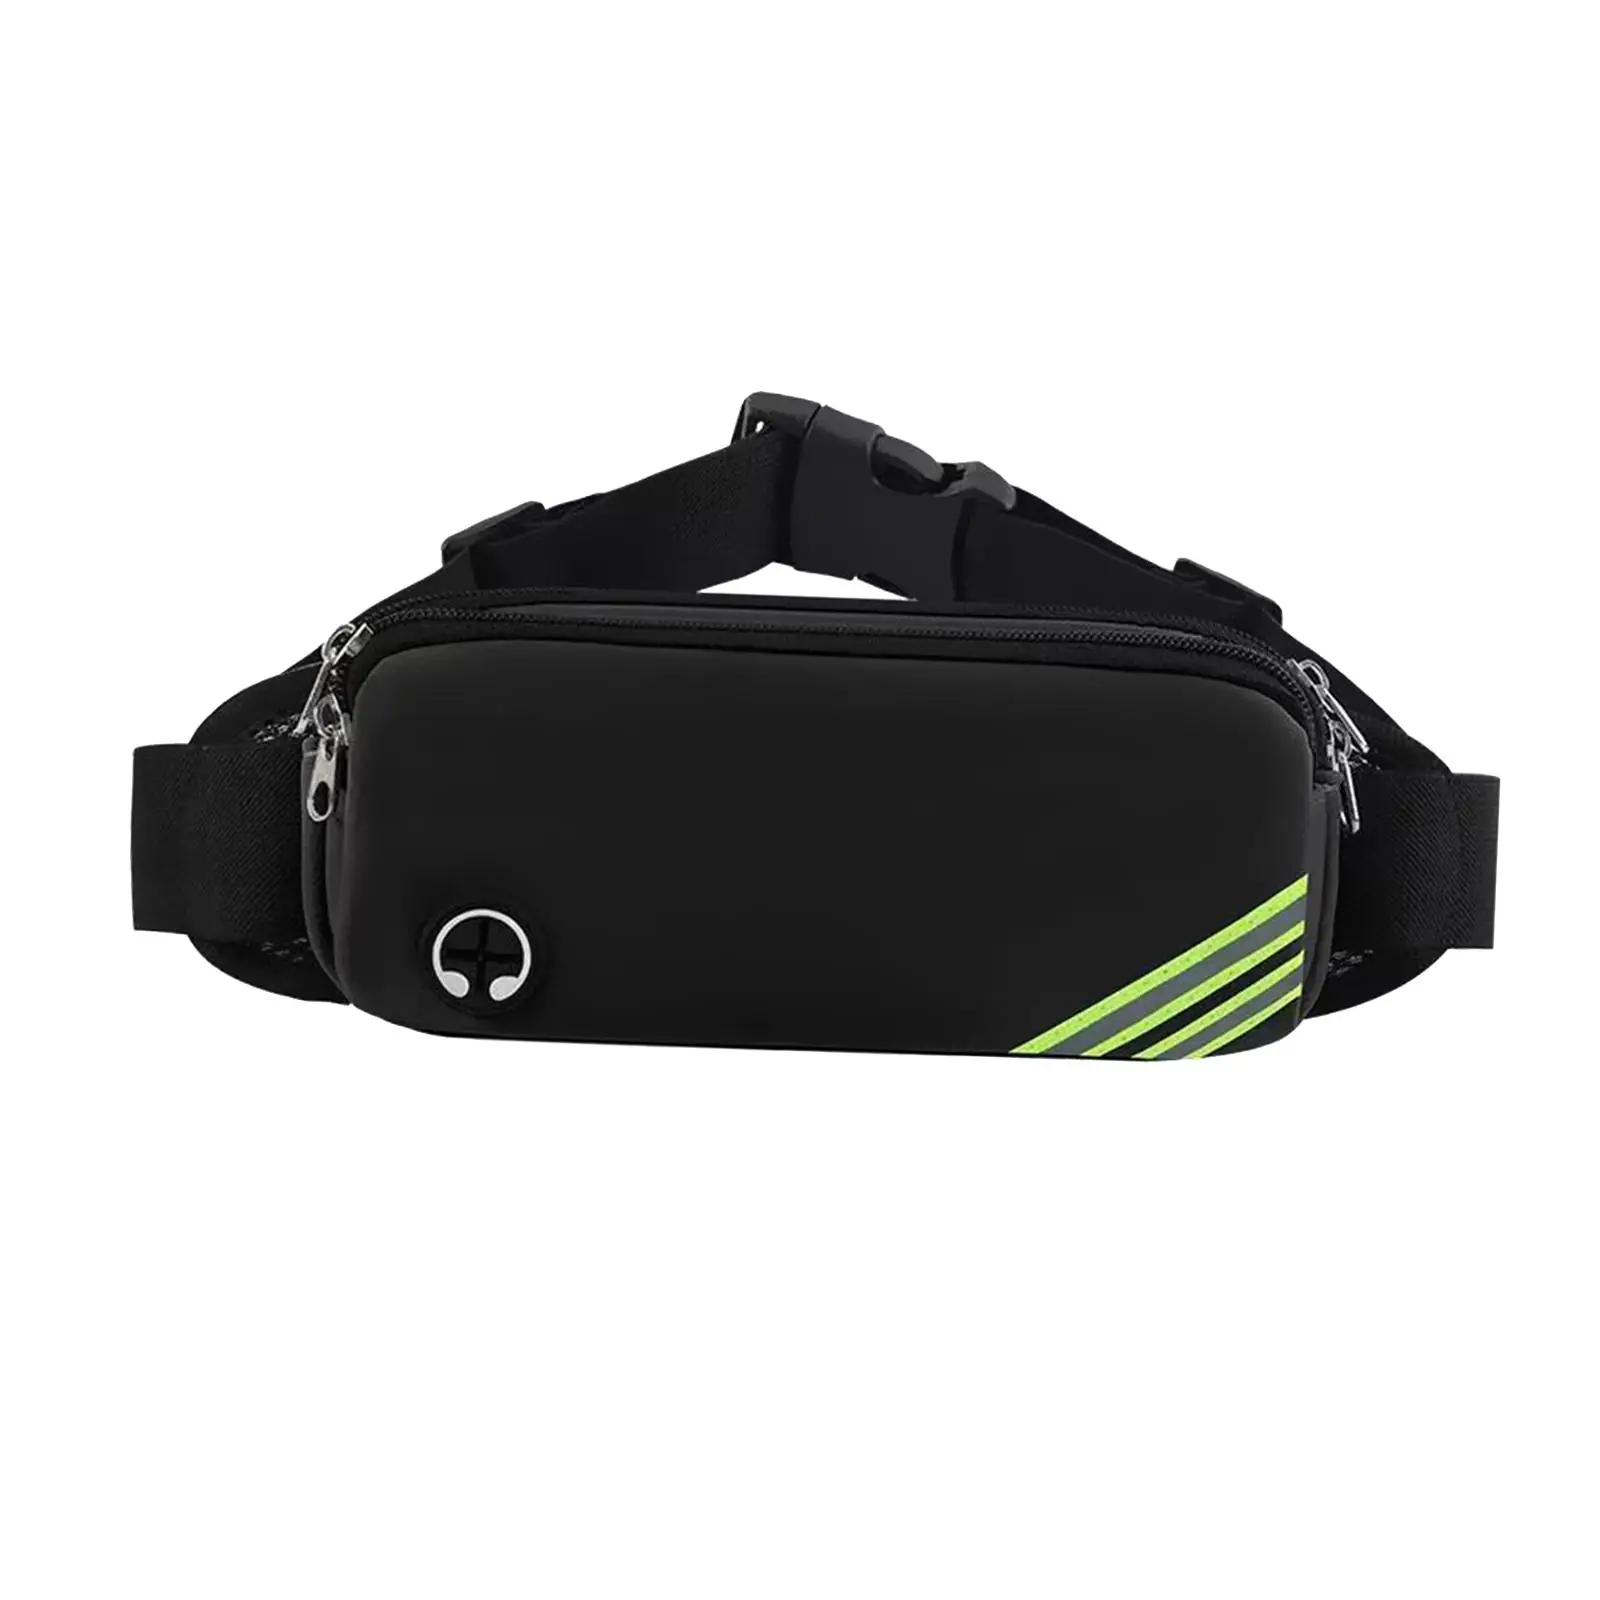 Unisex Waist Water Resistant Phone Holder Fanny Pack Small Waist Pack for Running Lady Women Fishing Casual